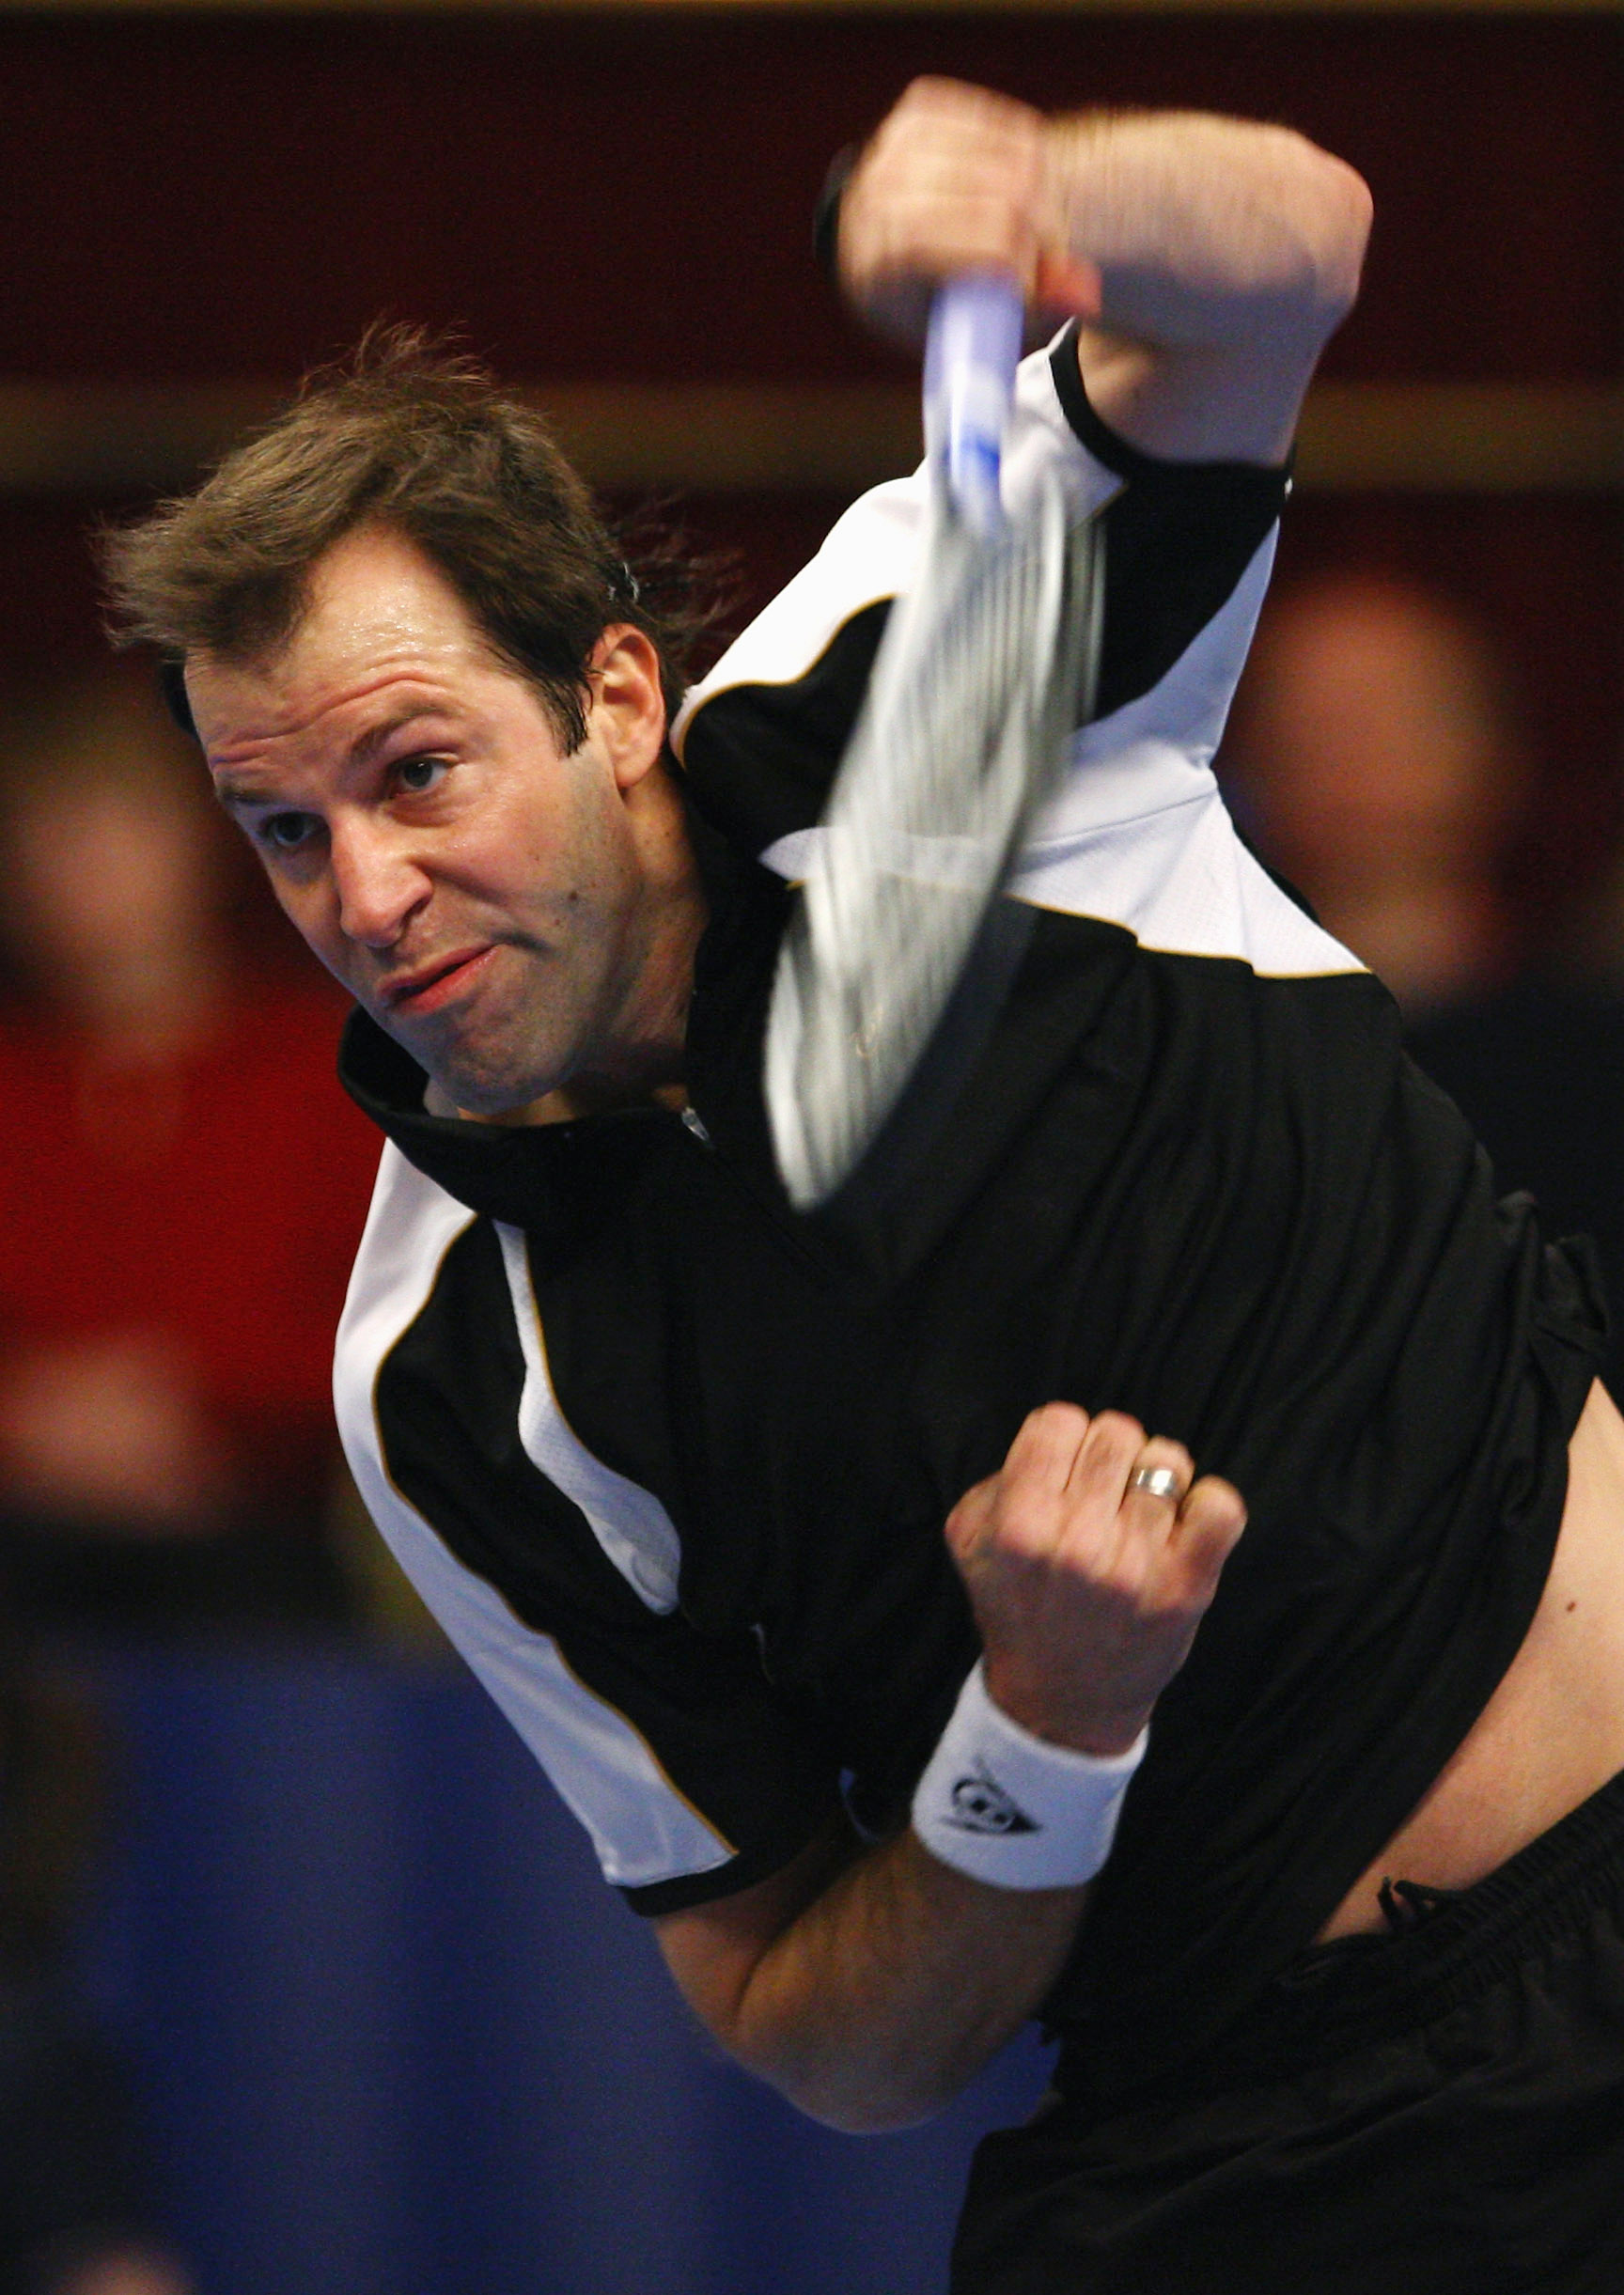 LONDON - DECEMBER 07:  Greg Rusedski of Great Britain serves to Cedric Pioline of France during the final of the BlackRock Masters Tennis at the Royal Albert Hall on December 7, 2008 in London, England.  (Photo by Julian Finney/Getty Images)